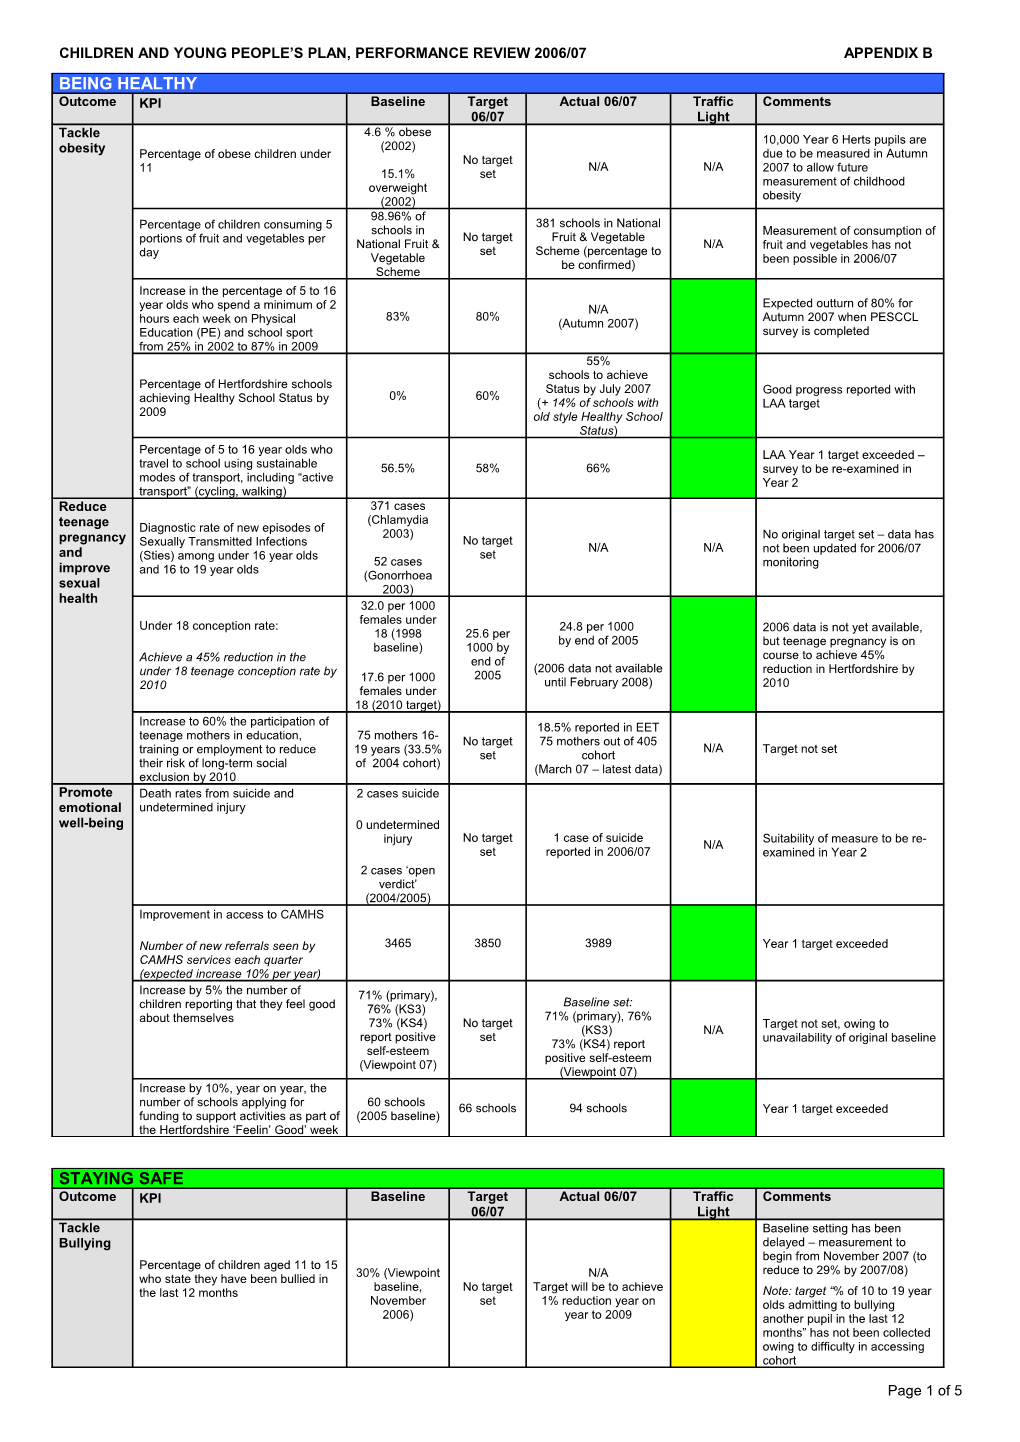 CHILDREN and YOUNG PEOPLE S PLAN, PERFORMANCE REVIEW 2006/07Appendix B